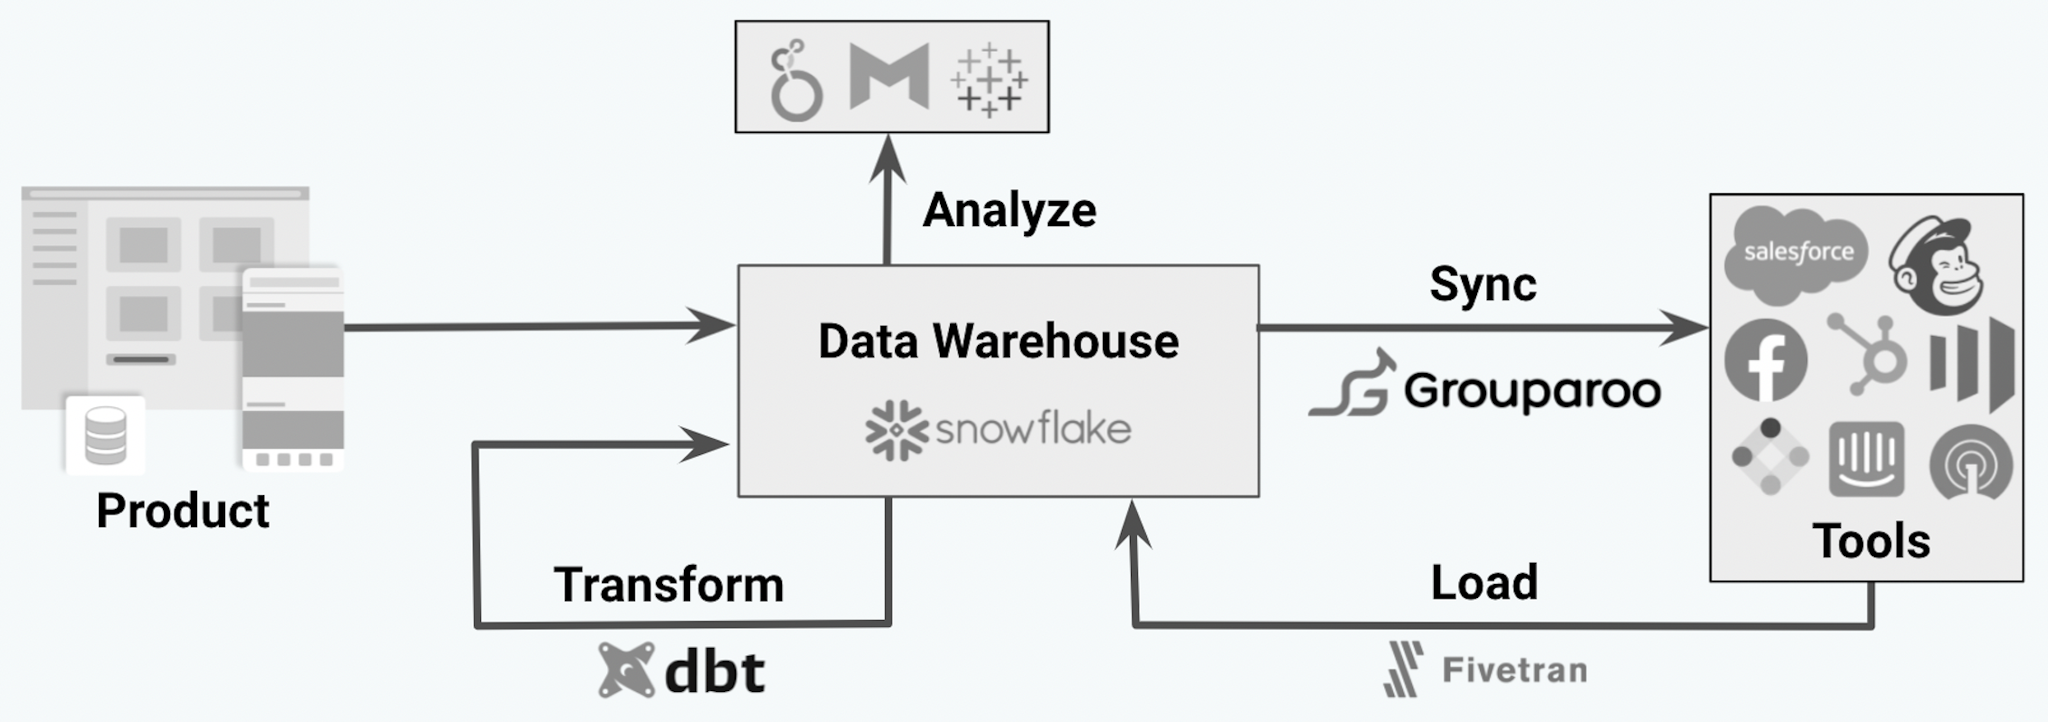 The modern data stack has the data warehouse at its center